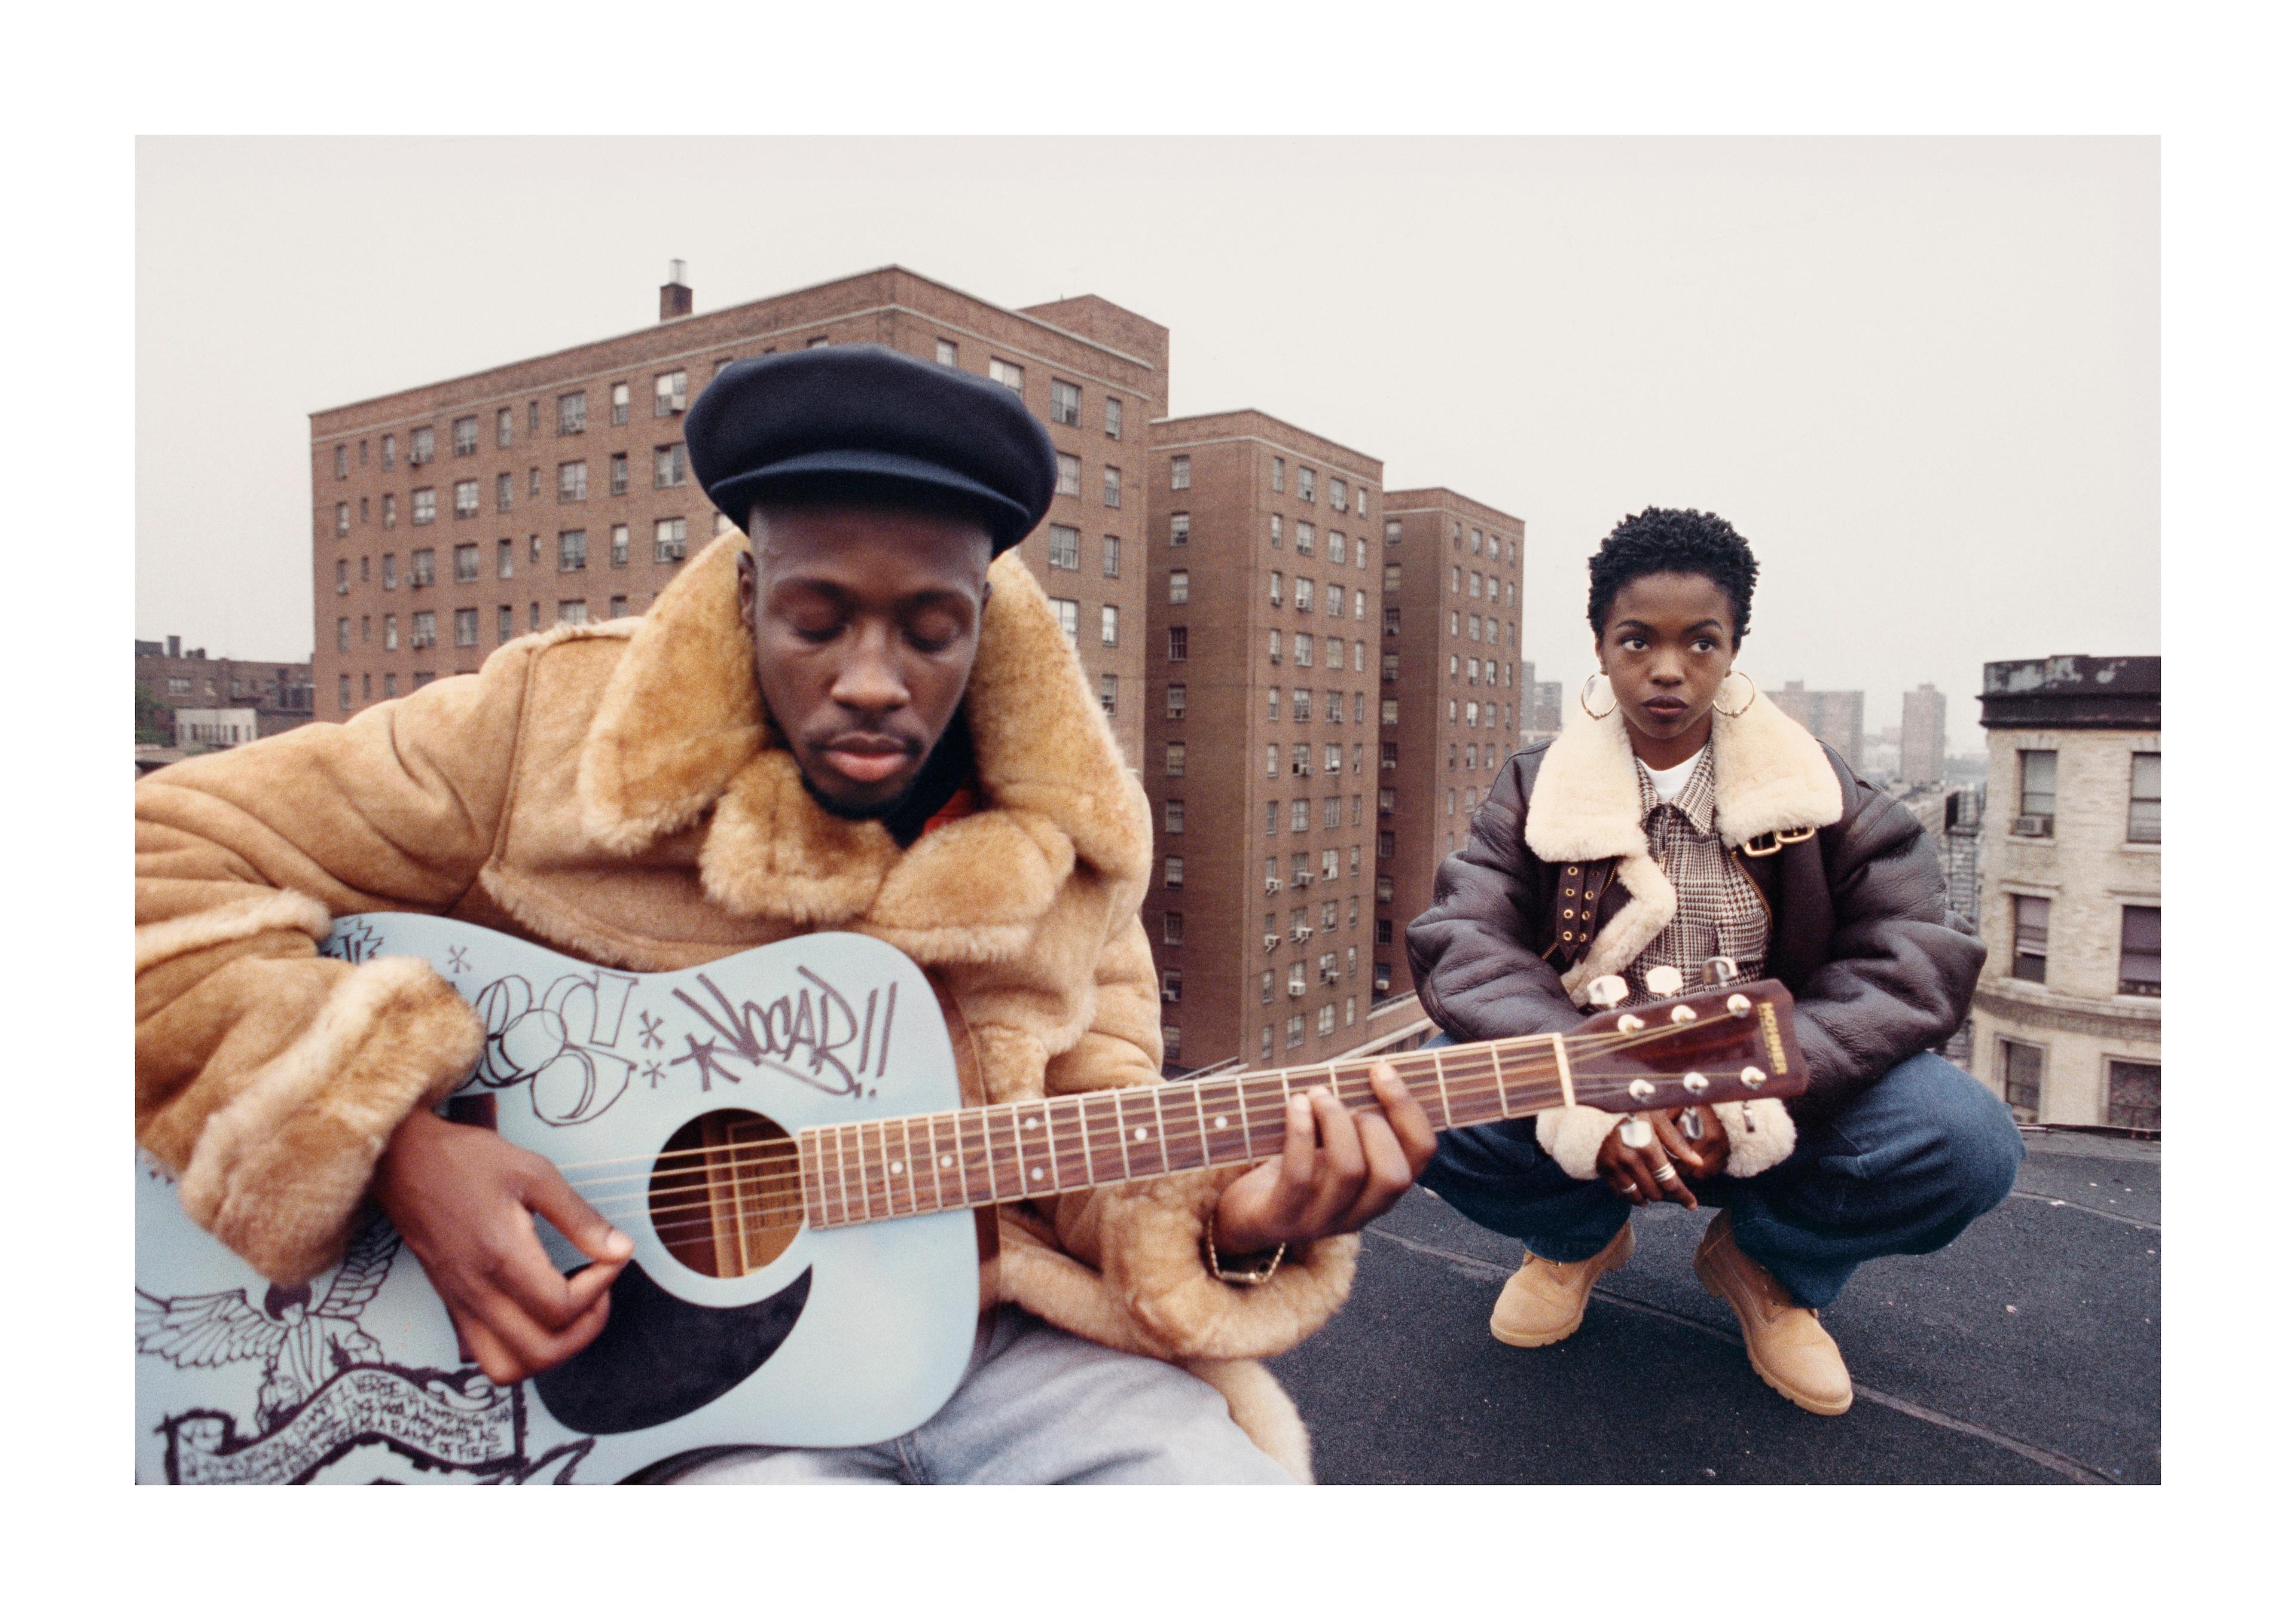 Lisa Leone - Wyclef Jean and Lauryn Hill, East Harlem, New York City (1993)